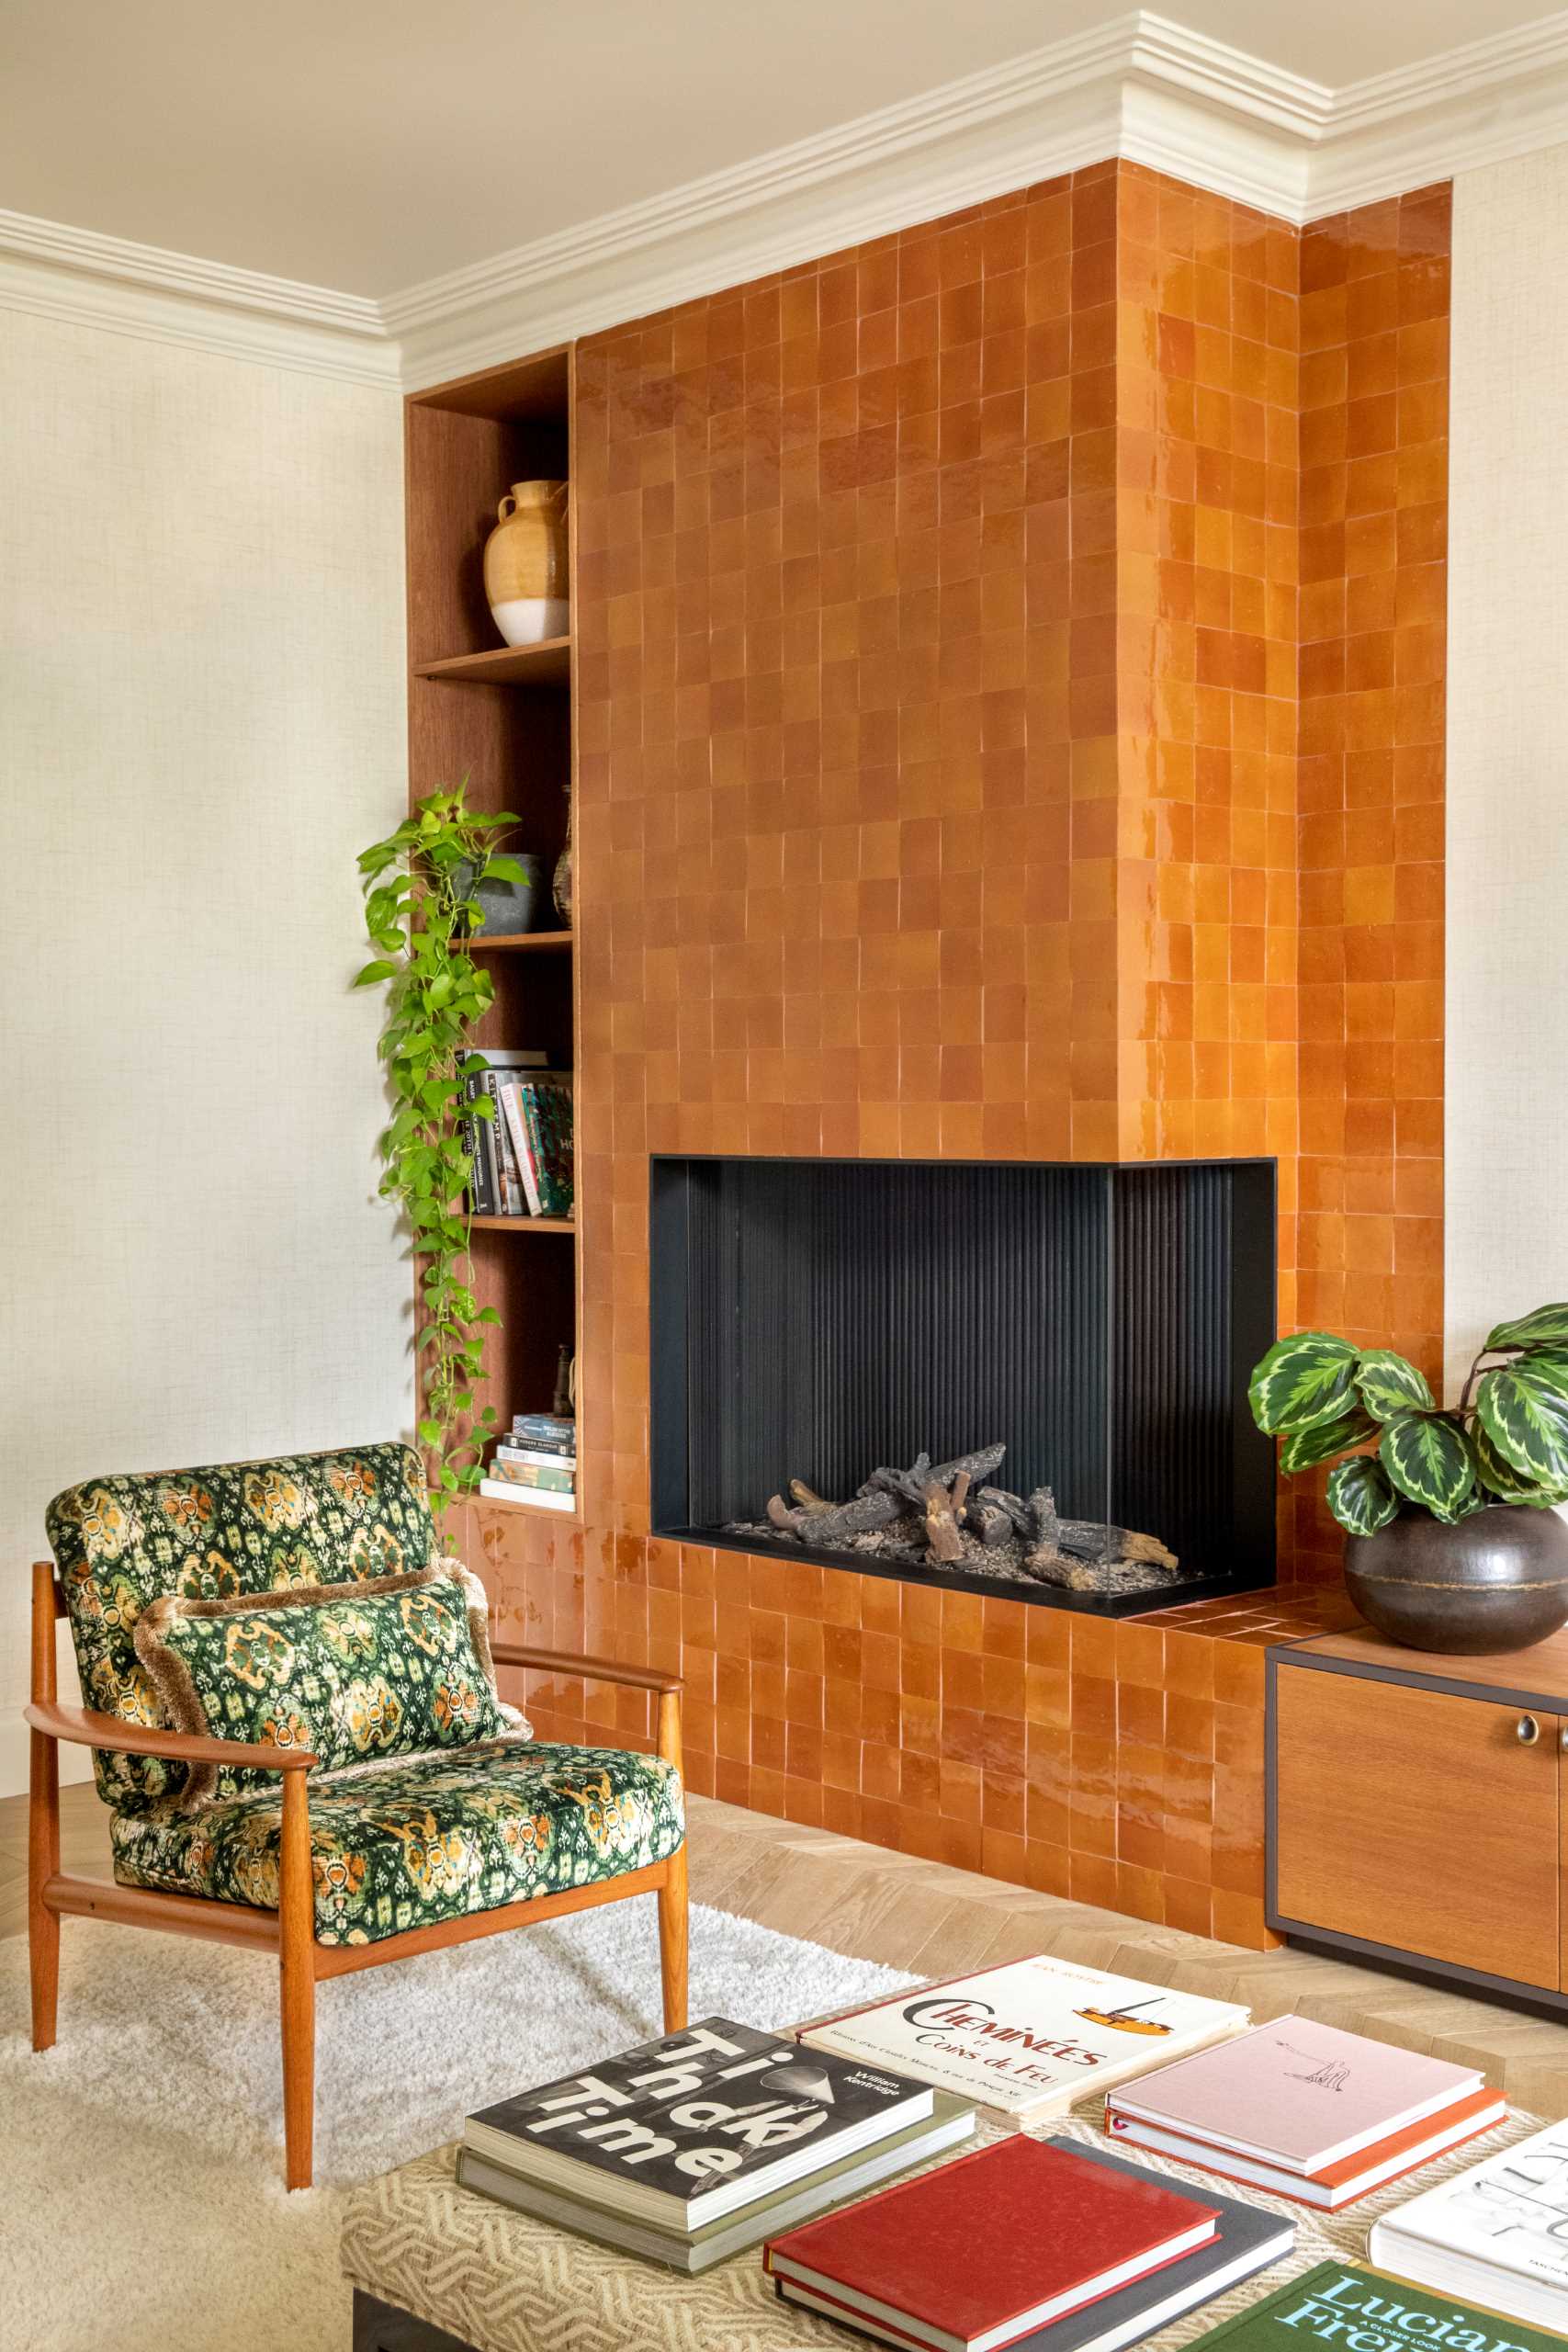 A tile-covered fireplace surround makes a bold statement in this living room.